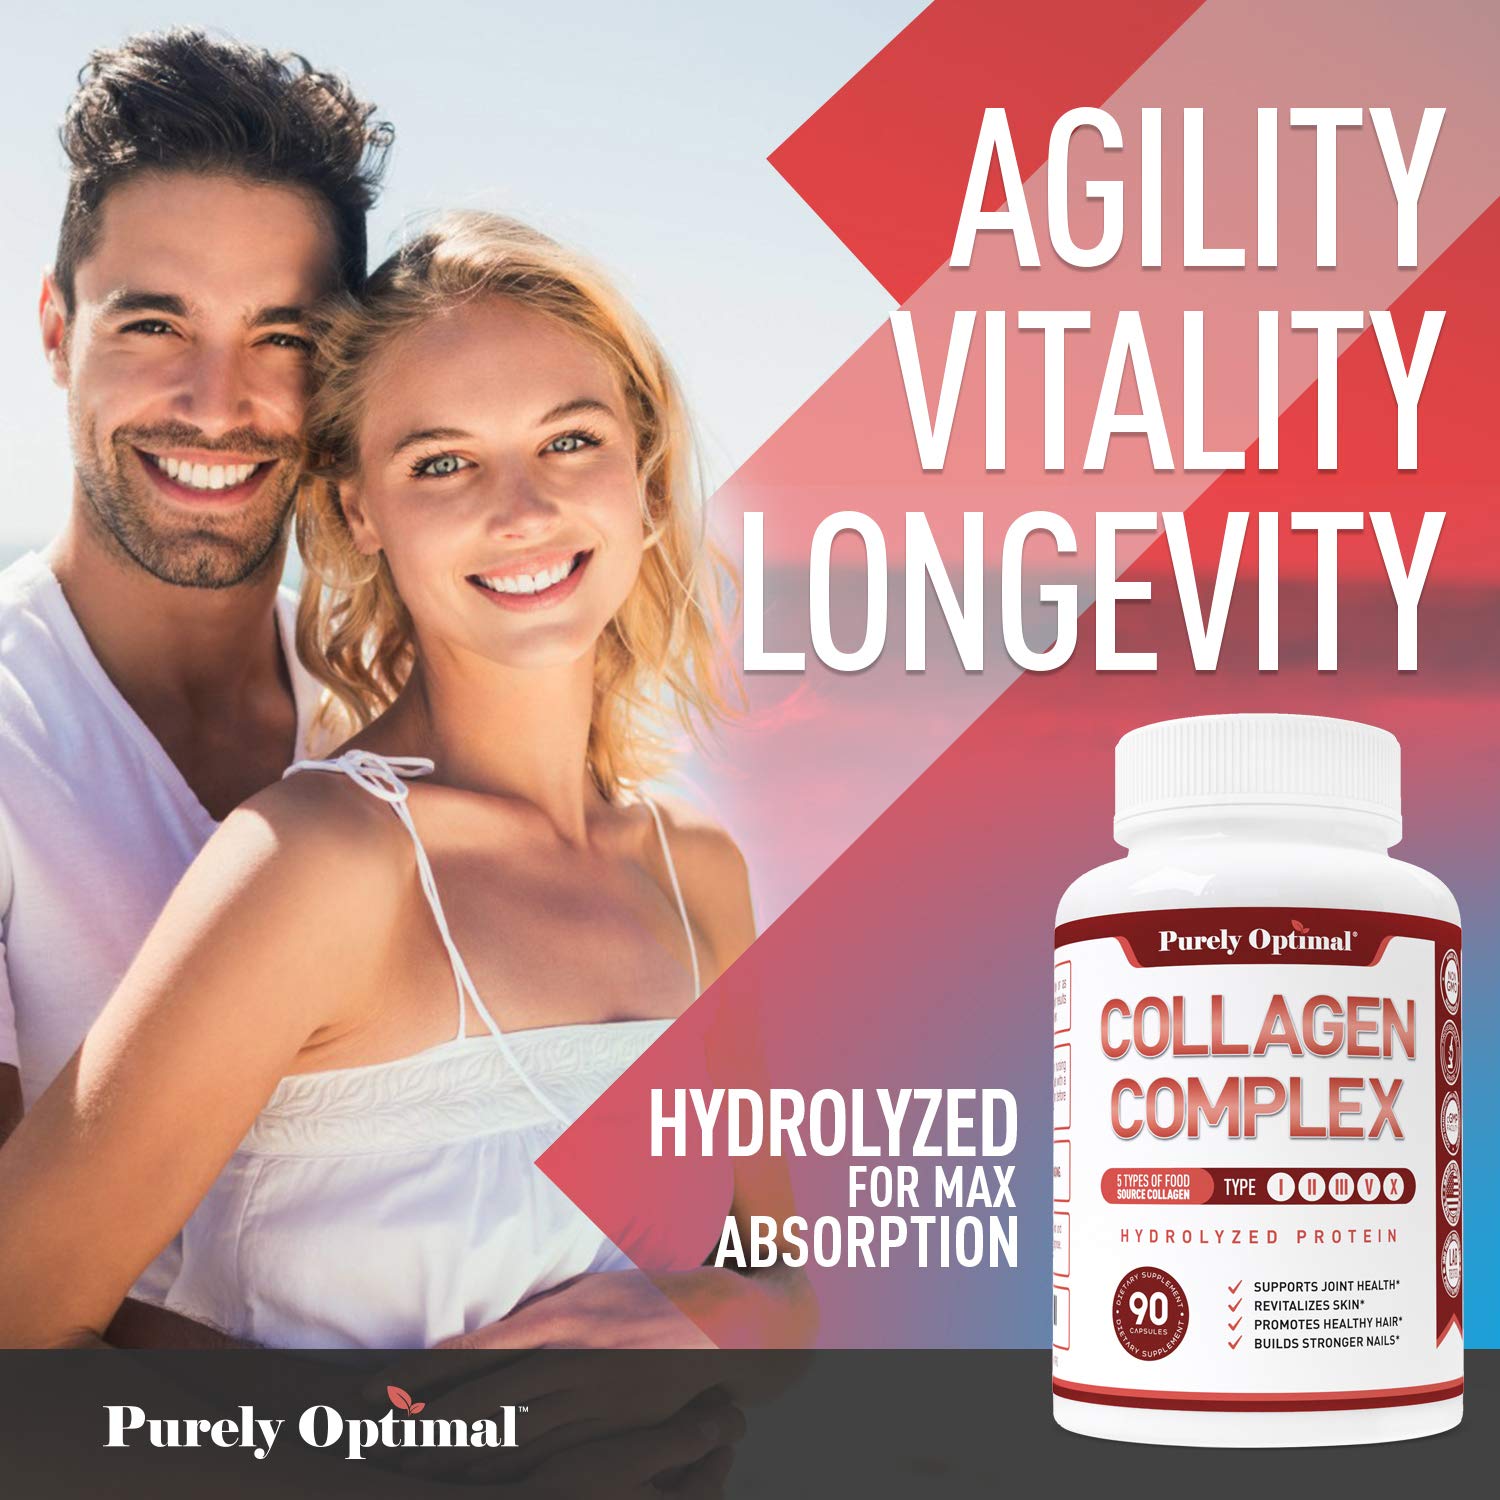 Purely Optimal Premium Multi Collagen Peptides Capsules (Types I, II, III, V, X) - Hair, Skin and Nails, Digestive & Joint Health Supplement, Hydrolyzed Collagen Pills (90 Capsules)